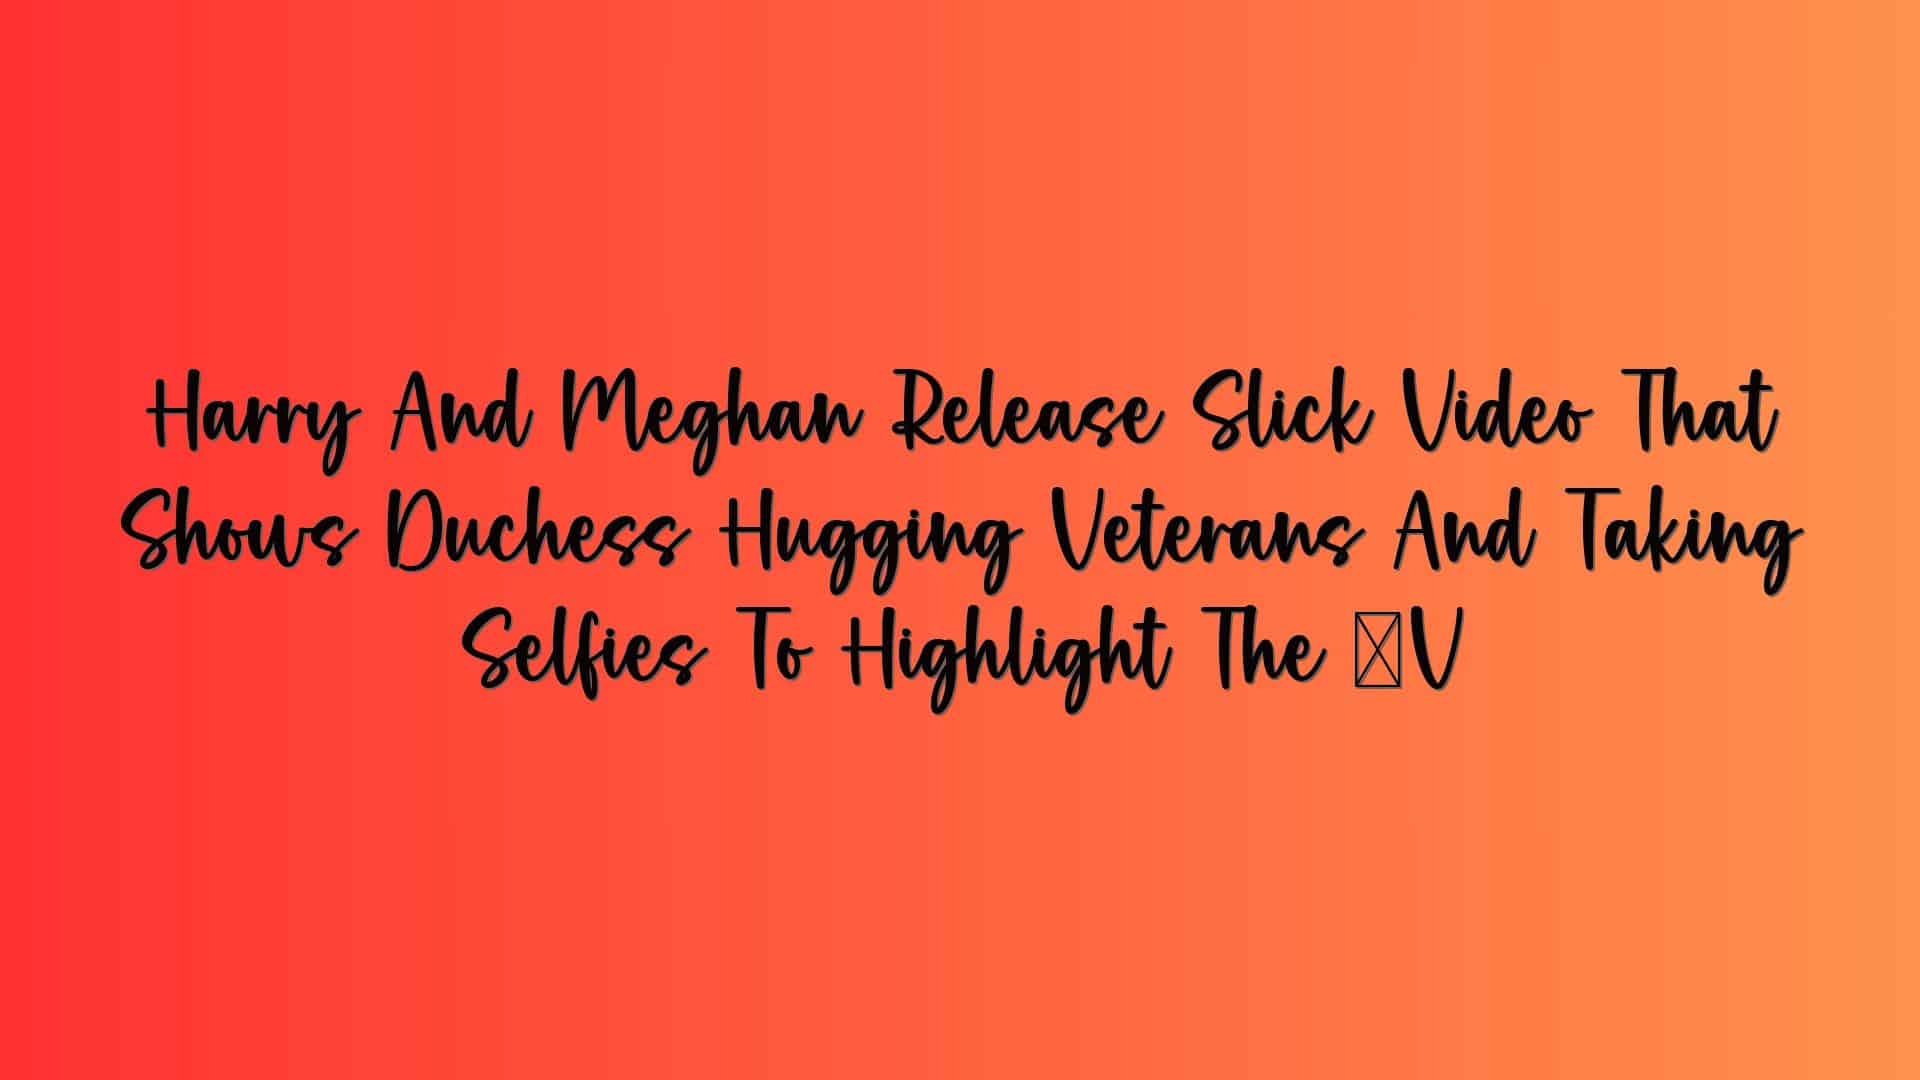 Harry And Meghan Release Slick Video That Shows Duchess Hugging Veterans And Taking Selfies To Highlight The ‘